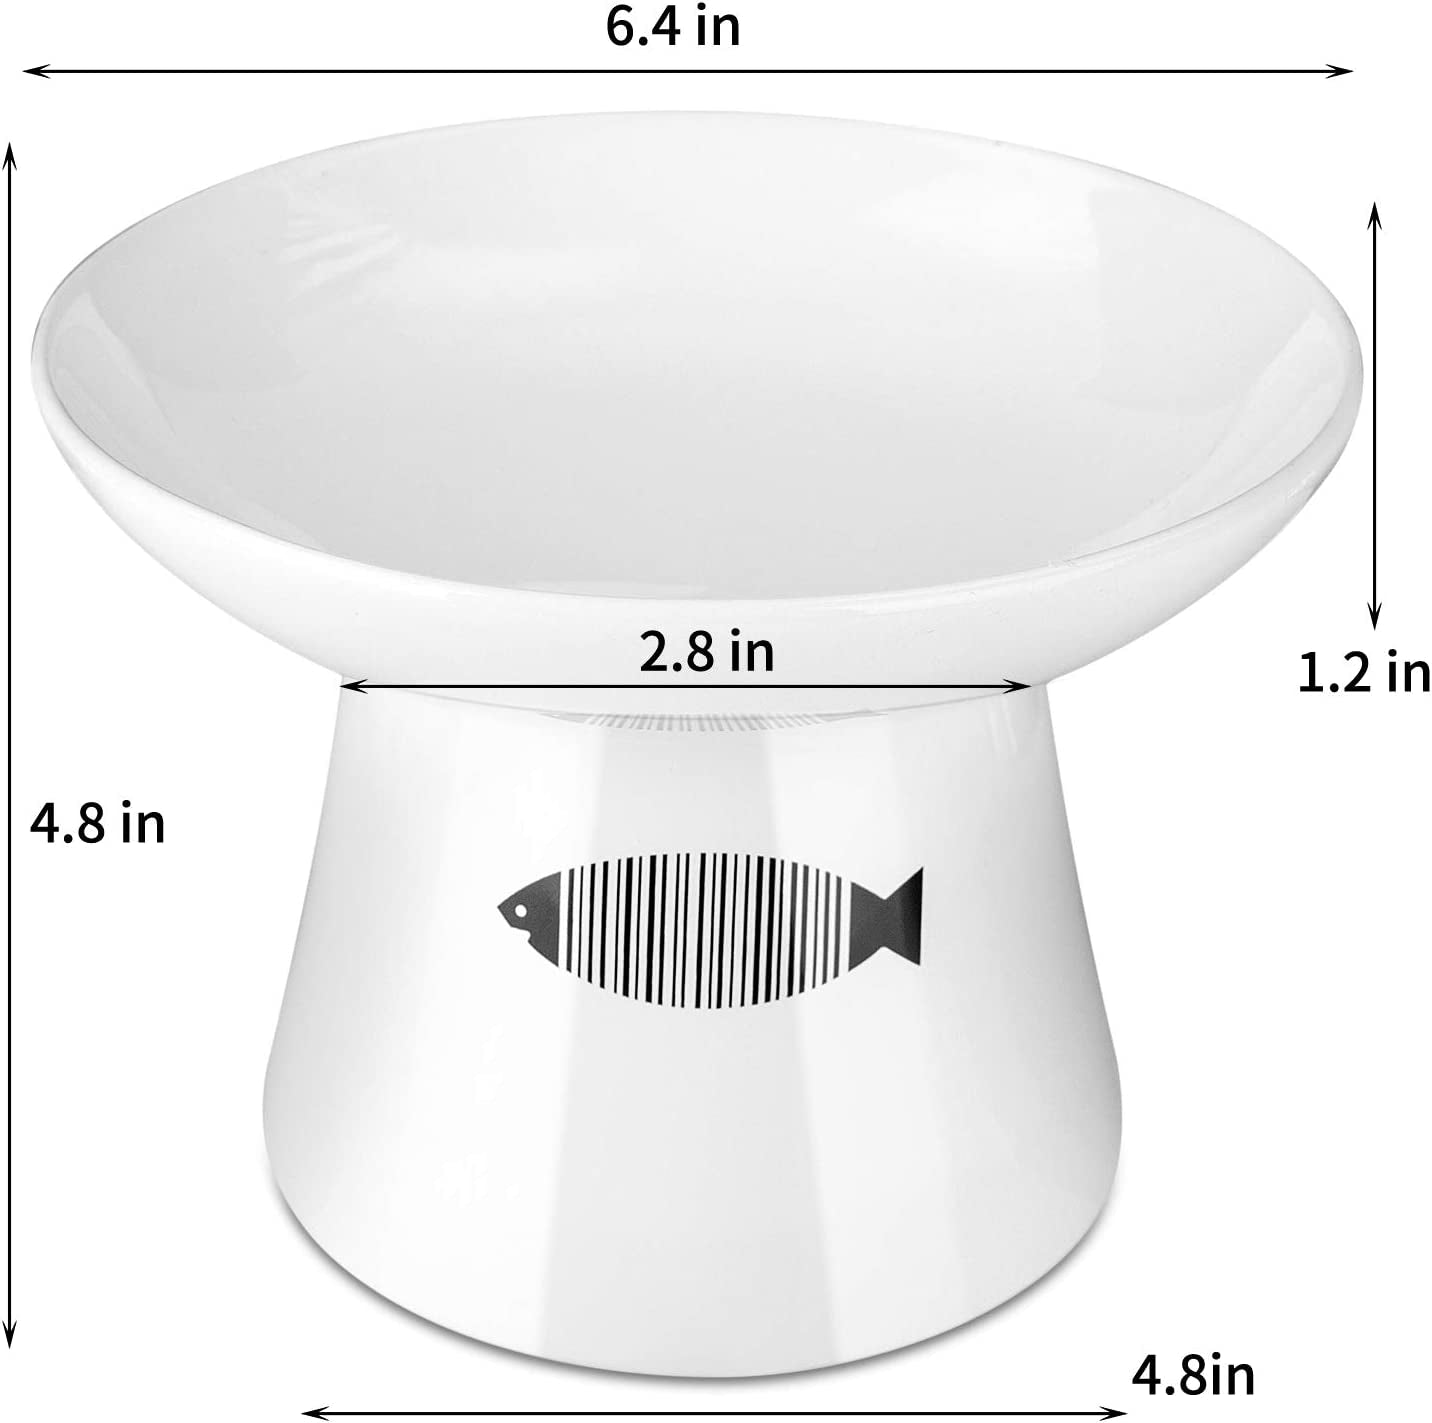 Cat Raised Food/Water Bowl for Elder Big Cats, Non-Skid 4.8X6.4In Premium Ceramic Cat Bowls with Stand, Sturdy and Anti-Fall… (White)